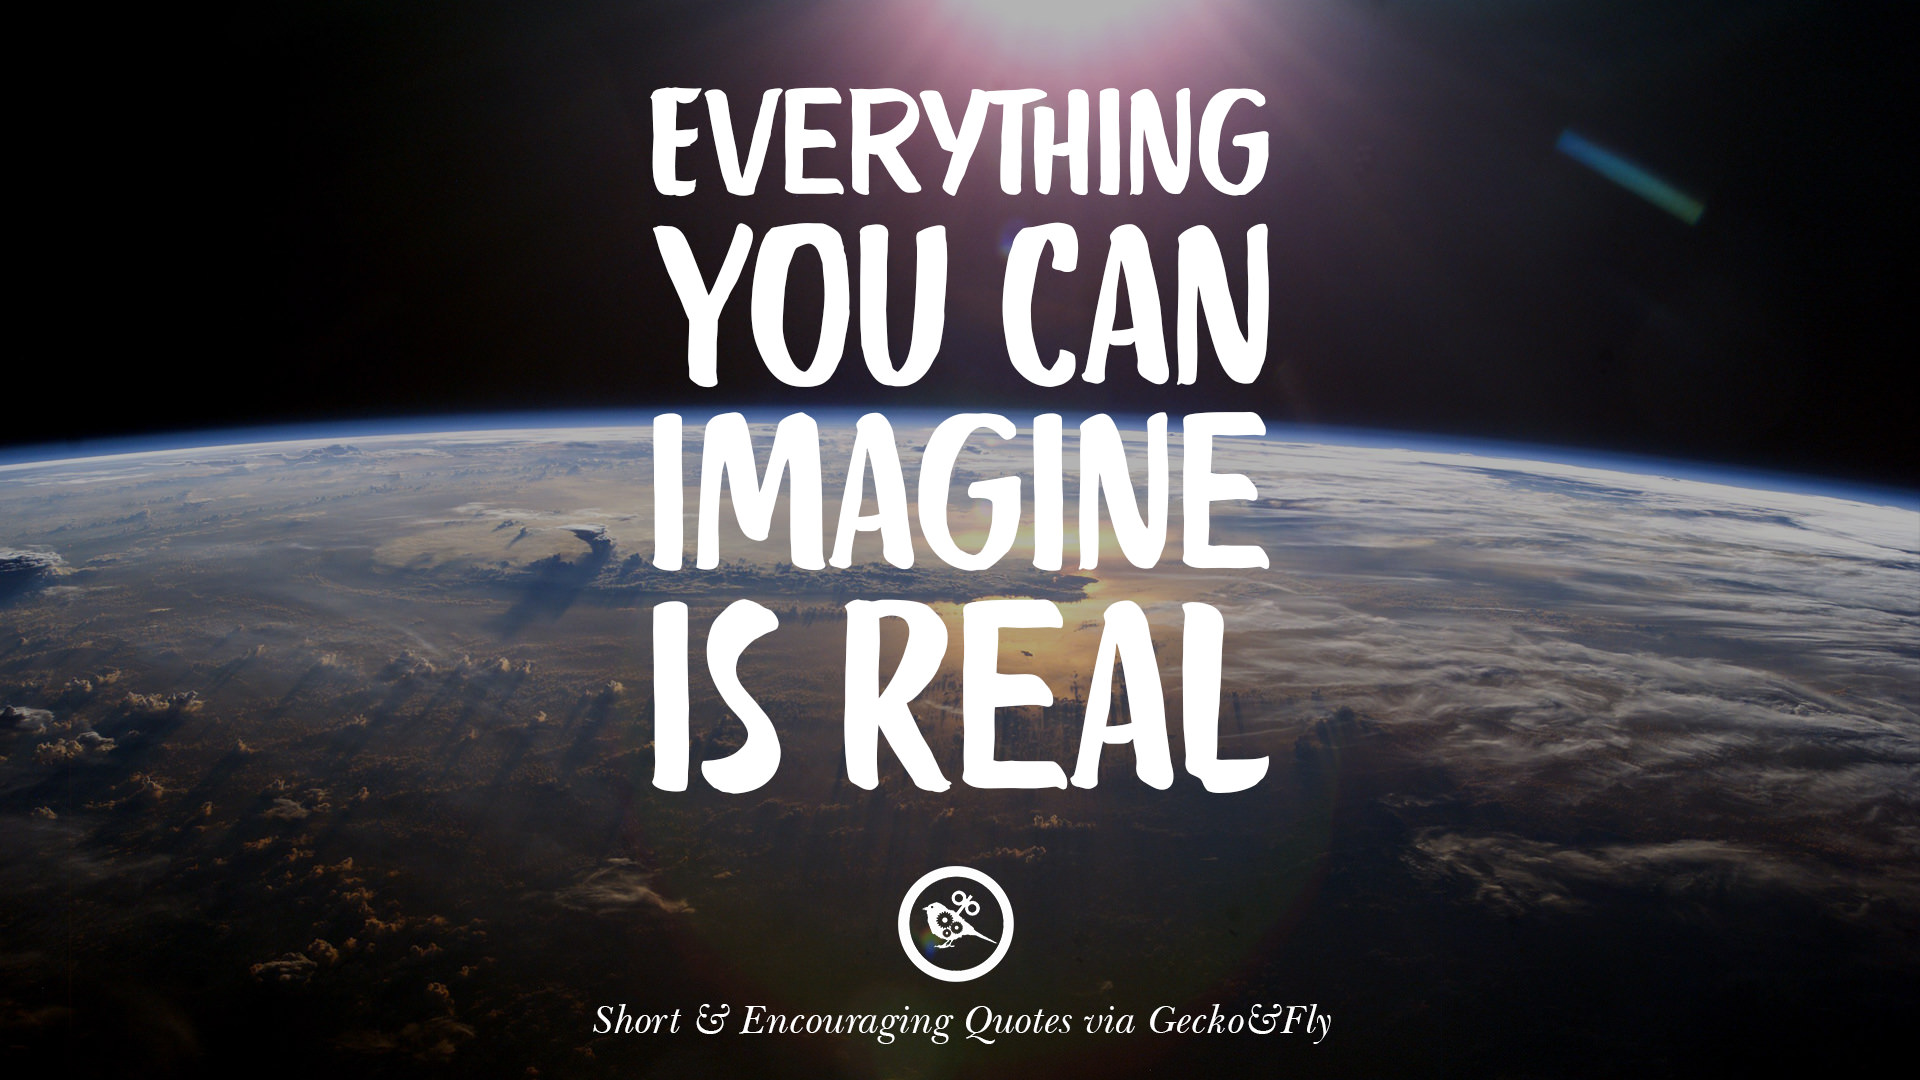 Real everything. Everything you imagine is real. You can everything. You can imagine is real. Can you imagine.